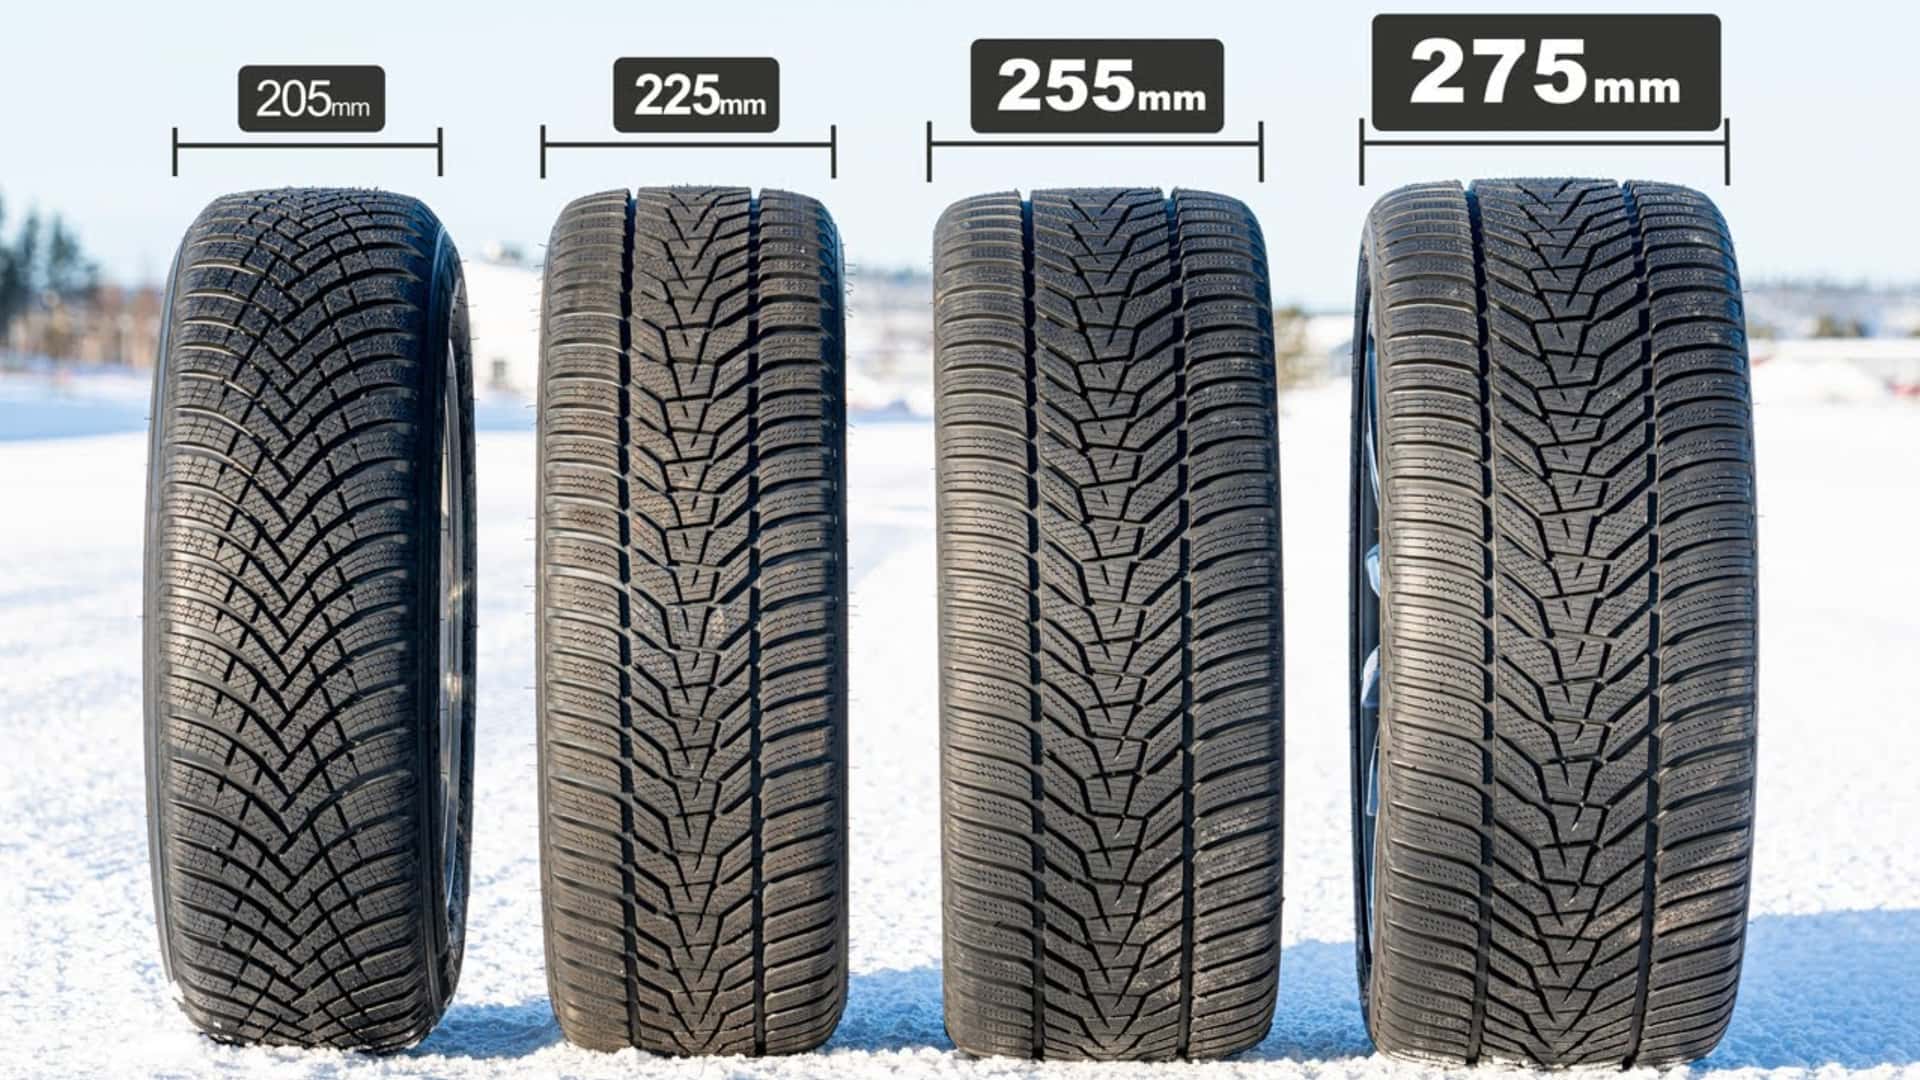 Wide Versus Narrow Winter Tires: It Doesn't Really Matter Which You Choose